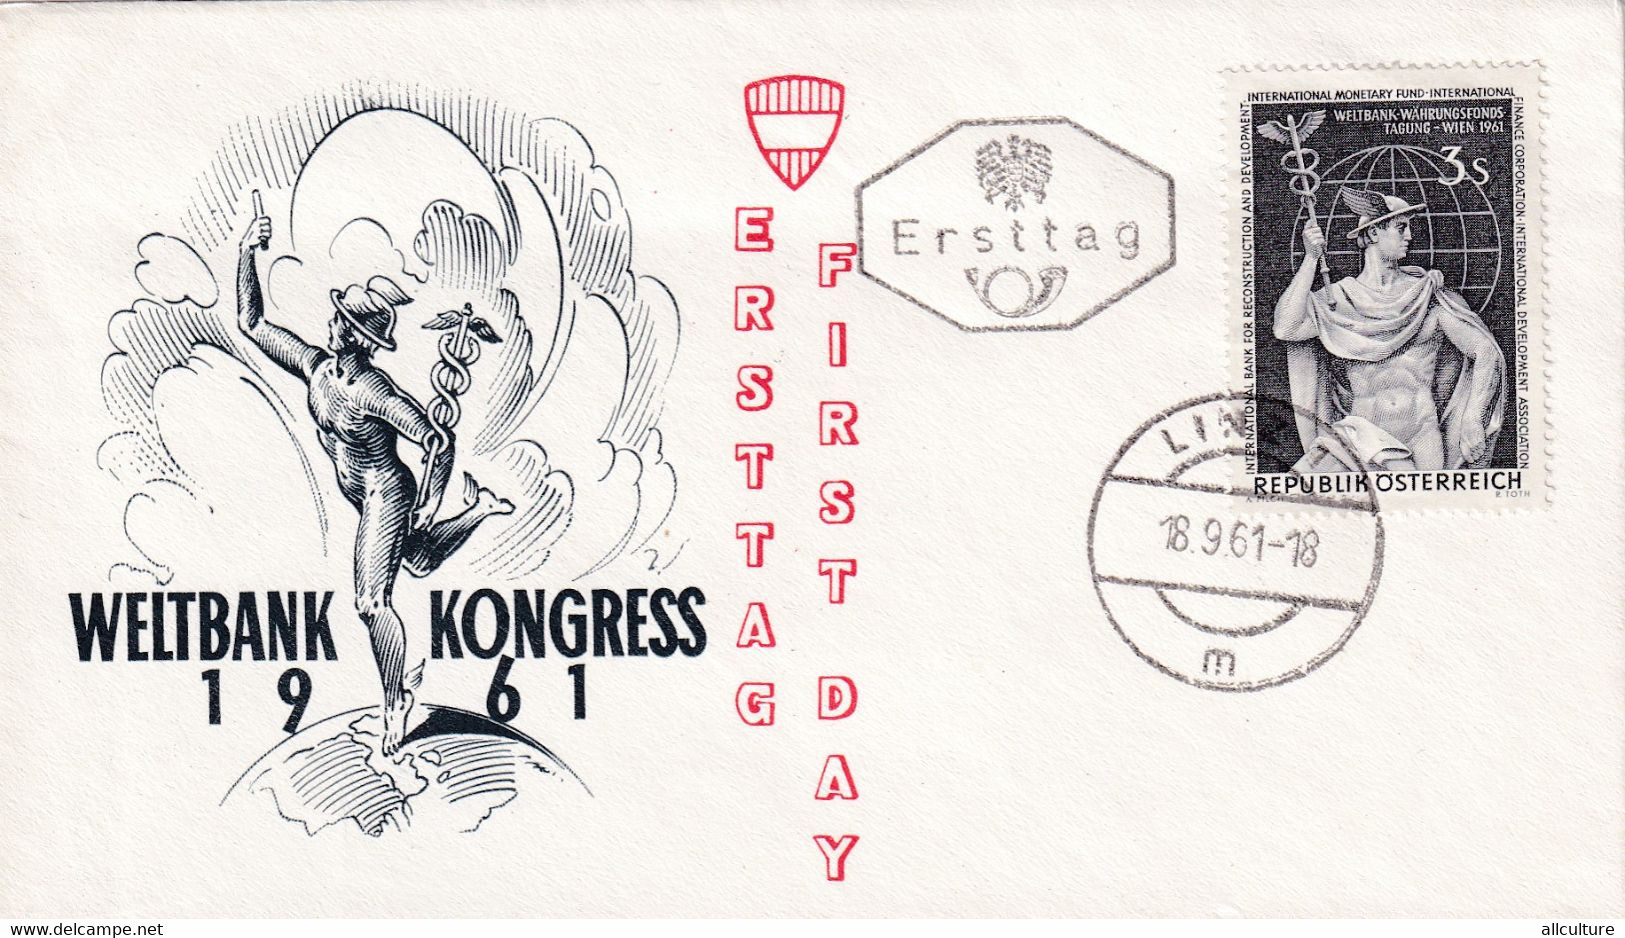 A8383- WELTBANK KONGRESS 1961, ERSTTAG, LINZ 1961 REPUBLIK OESTERREICH AUSTRIA USED STAMP ON COVER - Covers & Documents